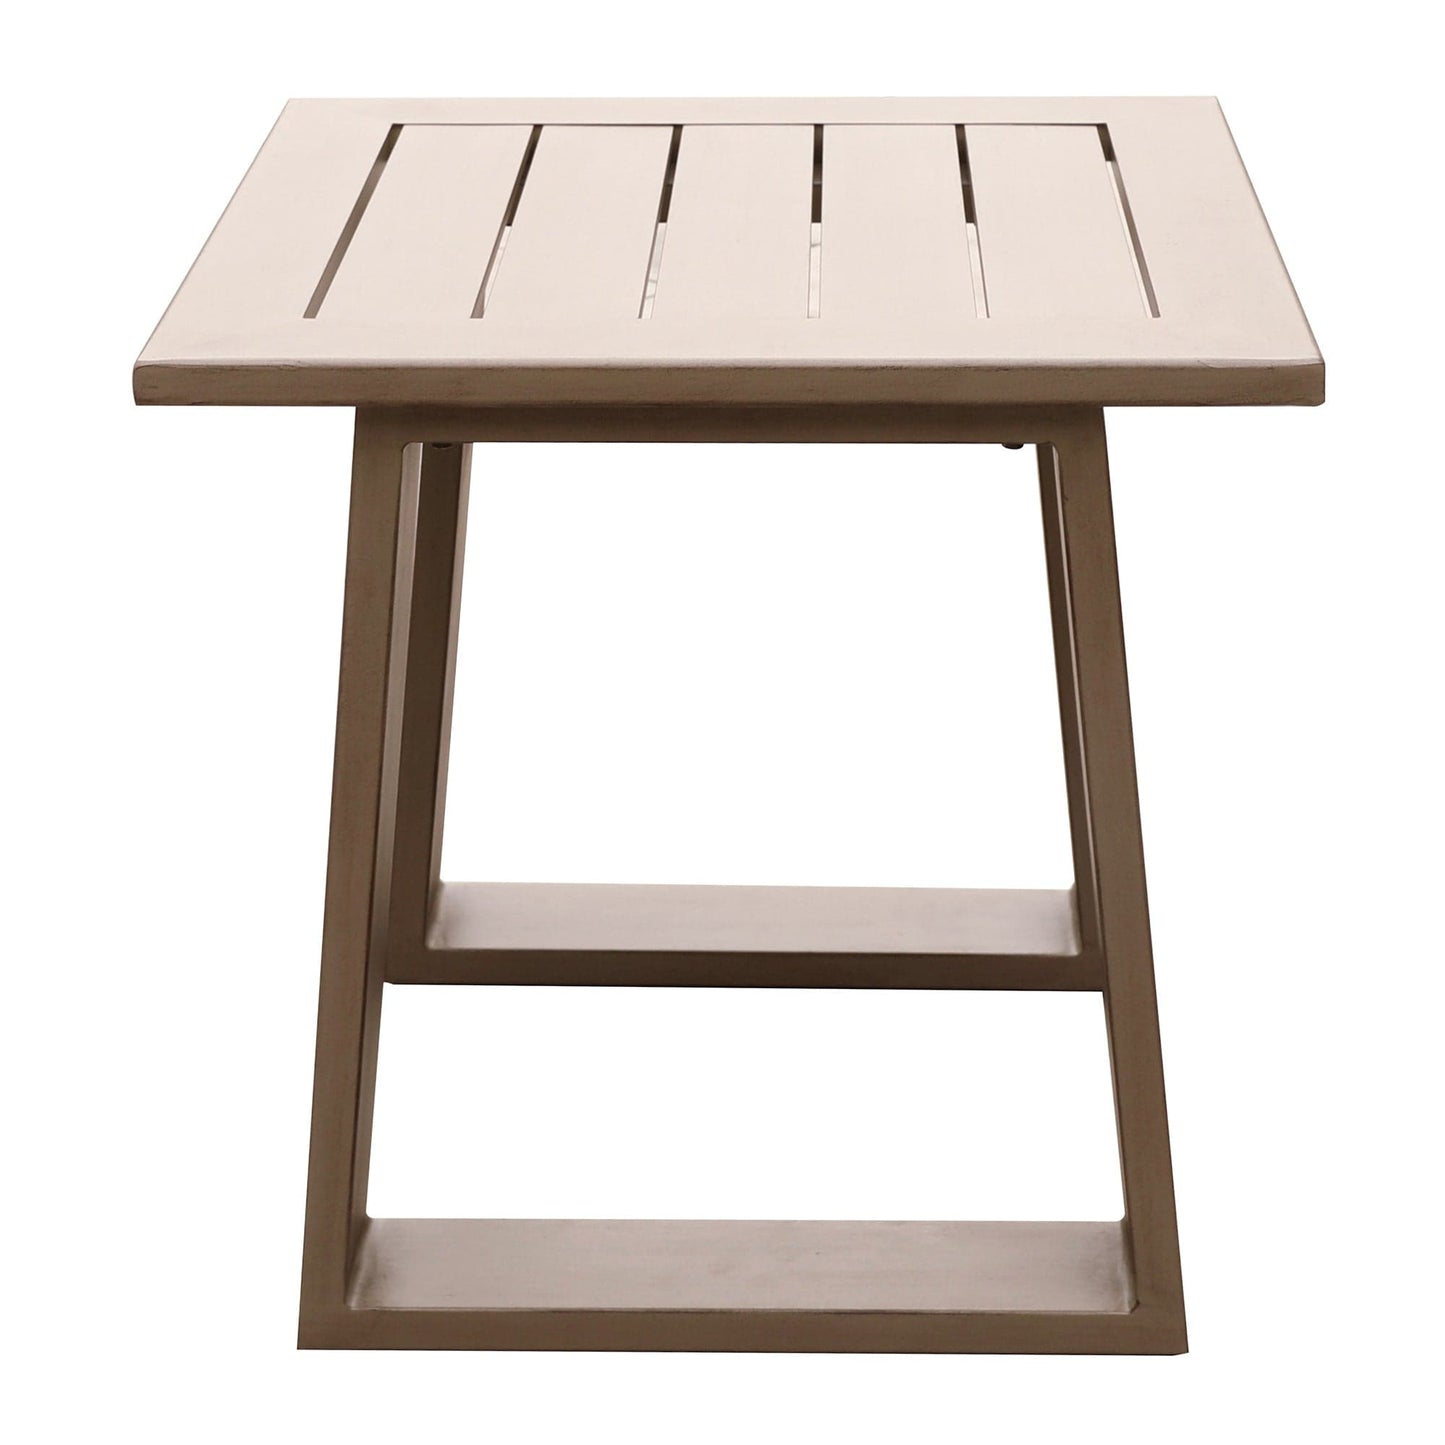 1st Choice Furniture Direct End Table 1st Choice Durable Modern Alassio's Wood Grained Aluminum End Table